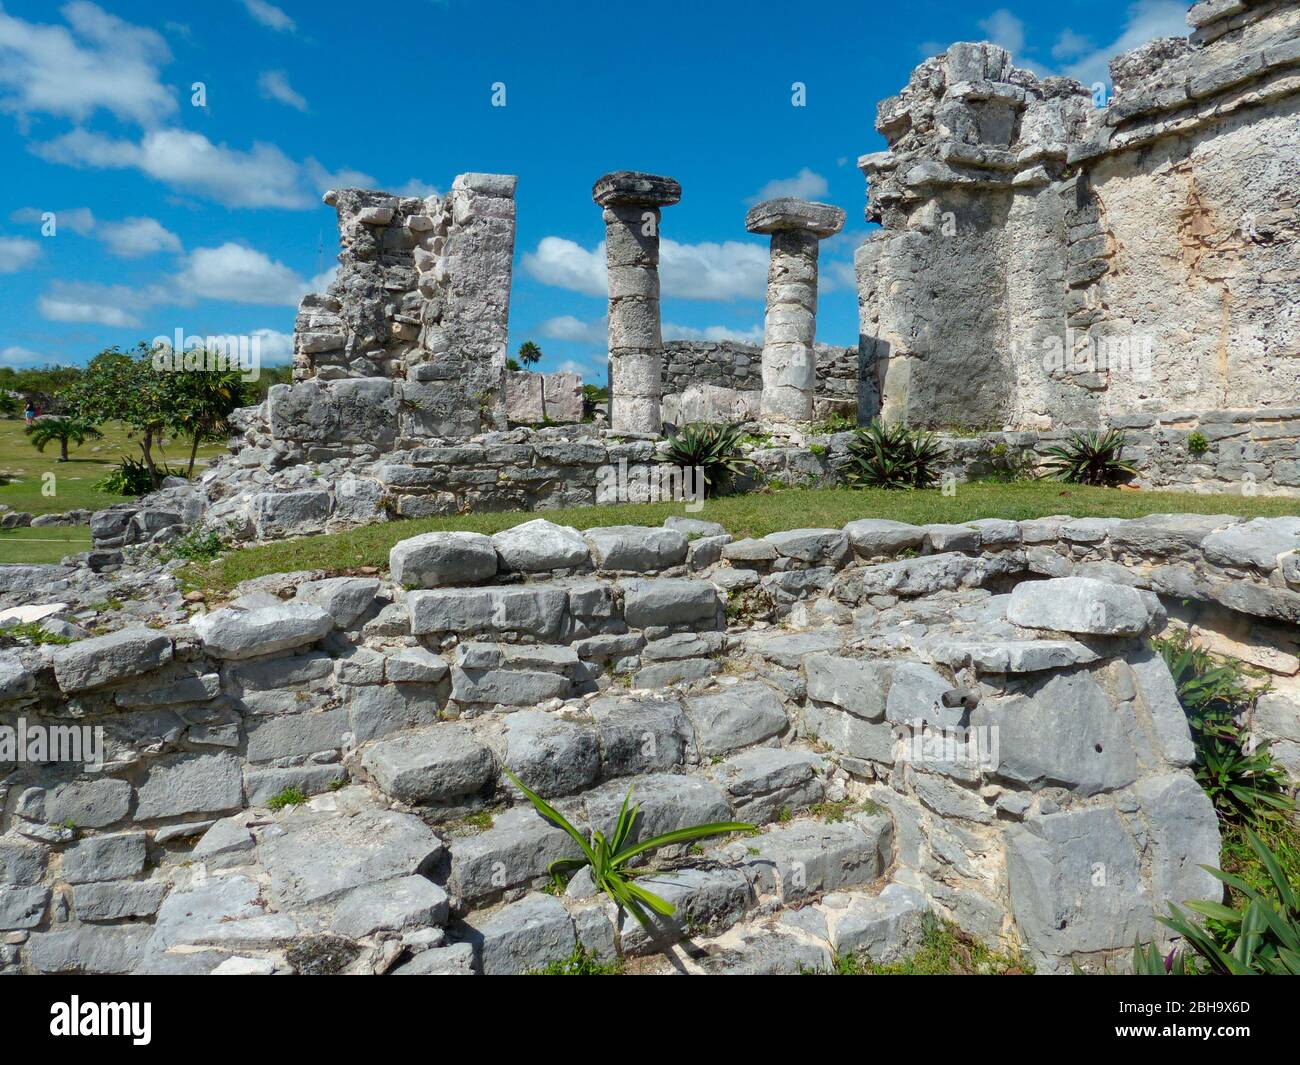 Maya ruins at Tulum, ss the site of a pre-Columbian Mayan walled city which served as a major port for Coba, in the Mexican state of Quintana Roo Stock Photo